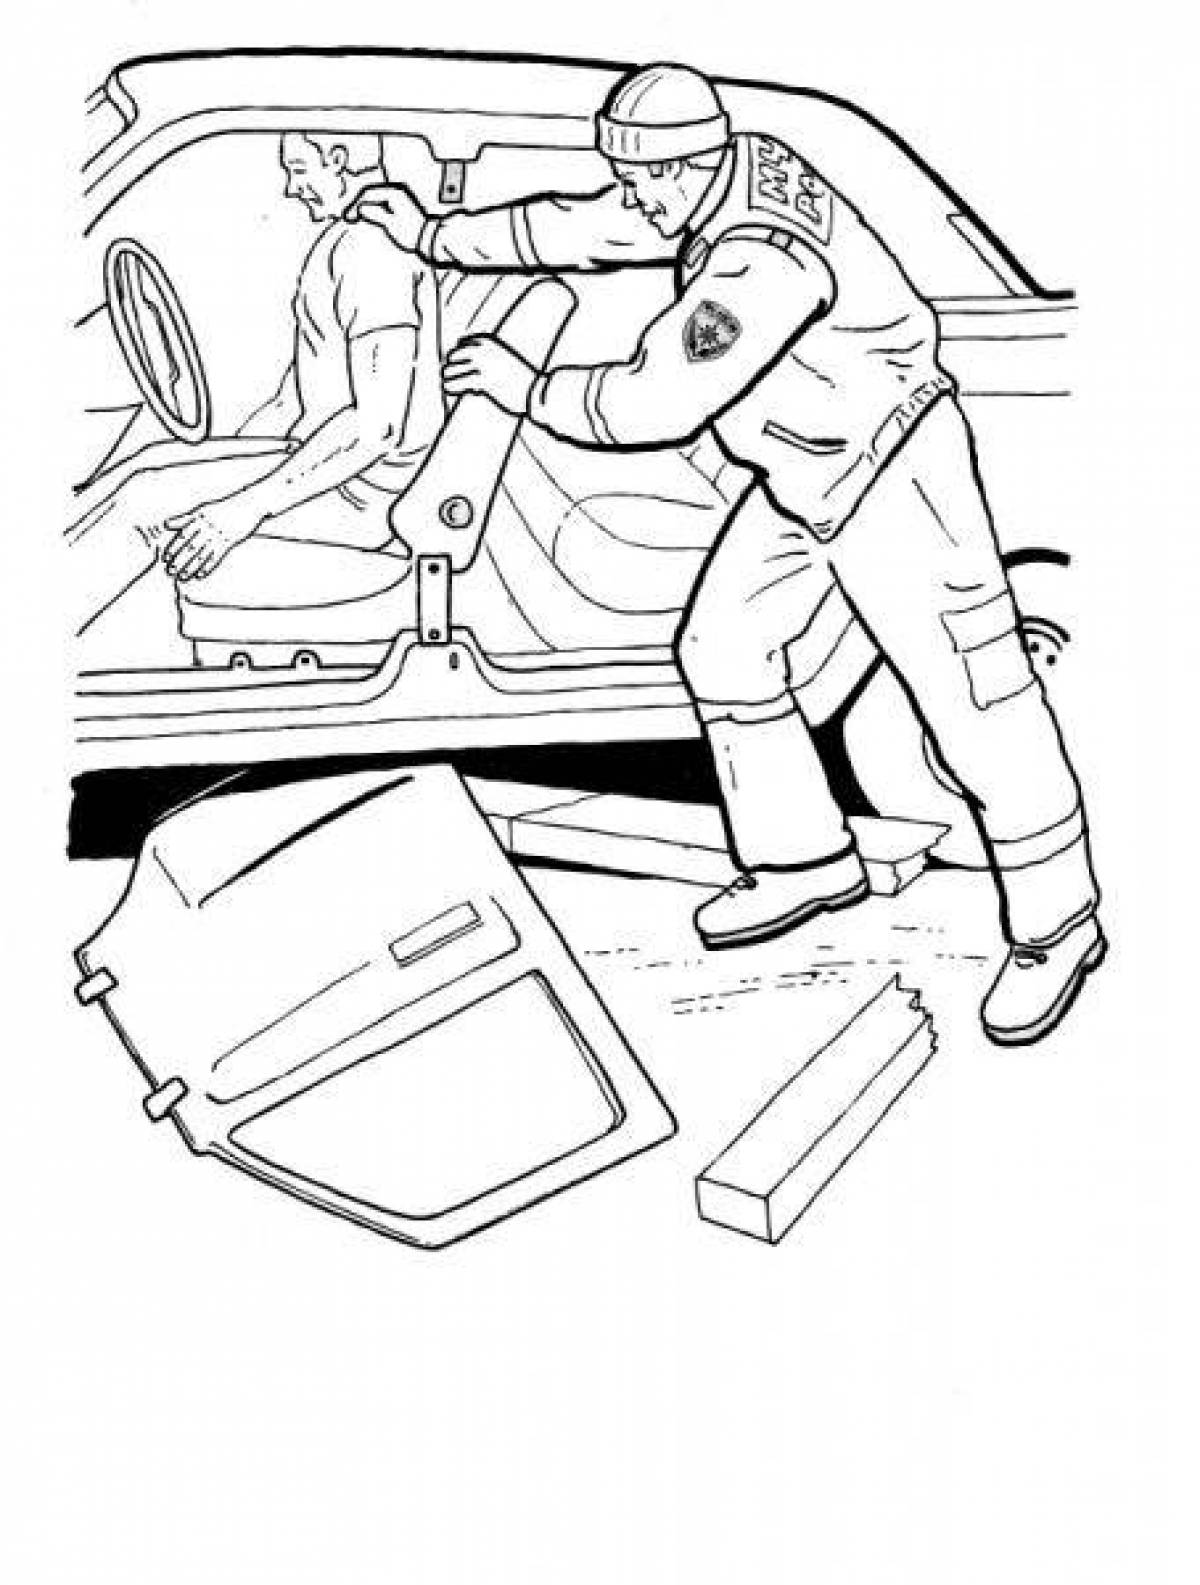 Crazy Rescuers coloring page